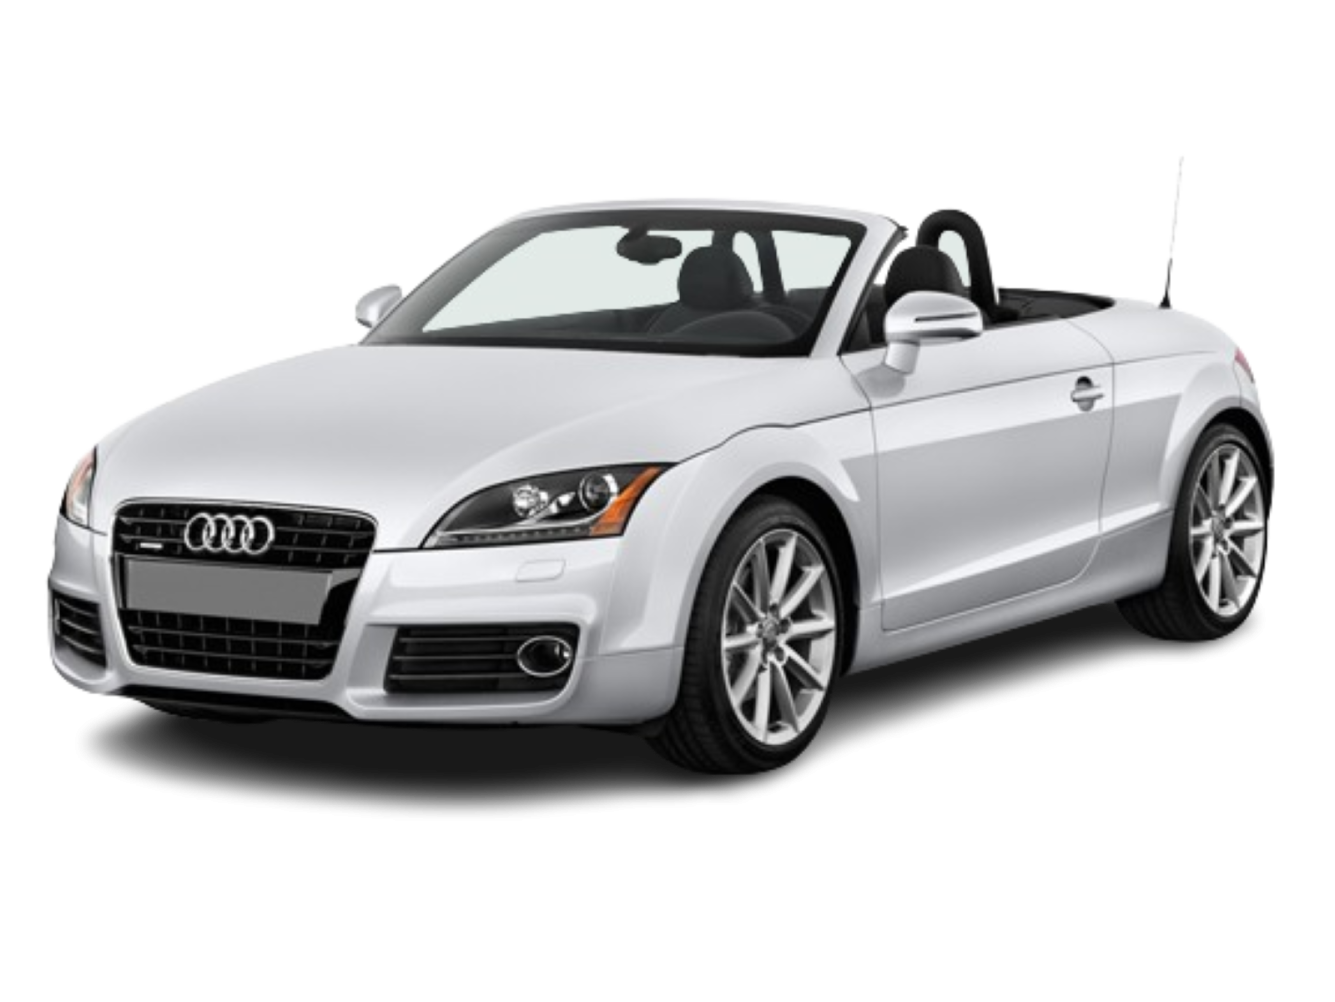 Rebuild/Upgrade Service for your Audi TT MK2 Convertible Top Hydraulic Components